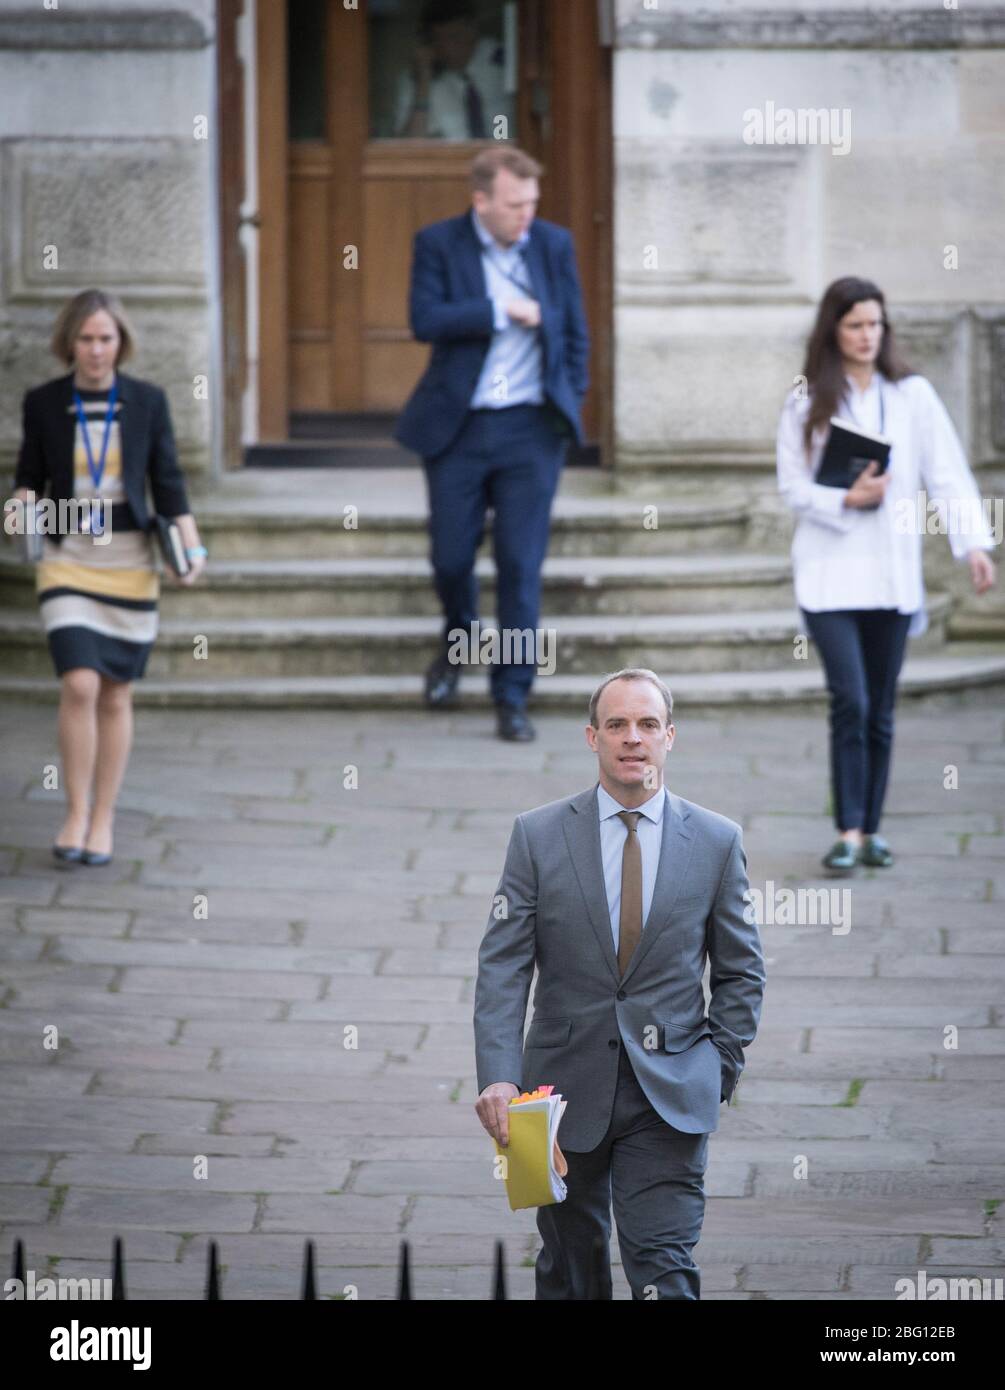 Foreign Secretary, Dominic Raab arrives in Downing Street, London for his daily meeting with heath officials. PA Photo. Picture date: Monday April 20, 2020. See PA story HEALTH Coronavirus. Photo credit should read: Stefan Rousseau/PA Wire Stock Photo